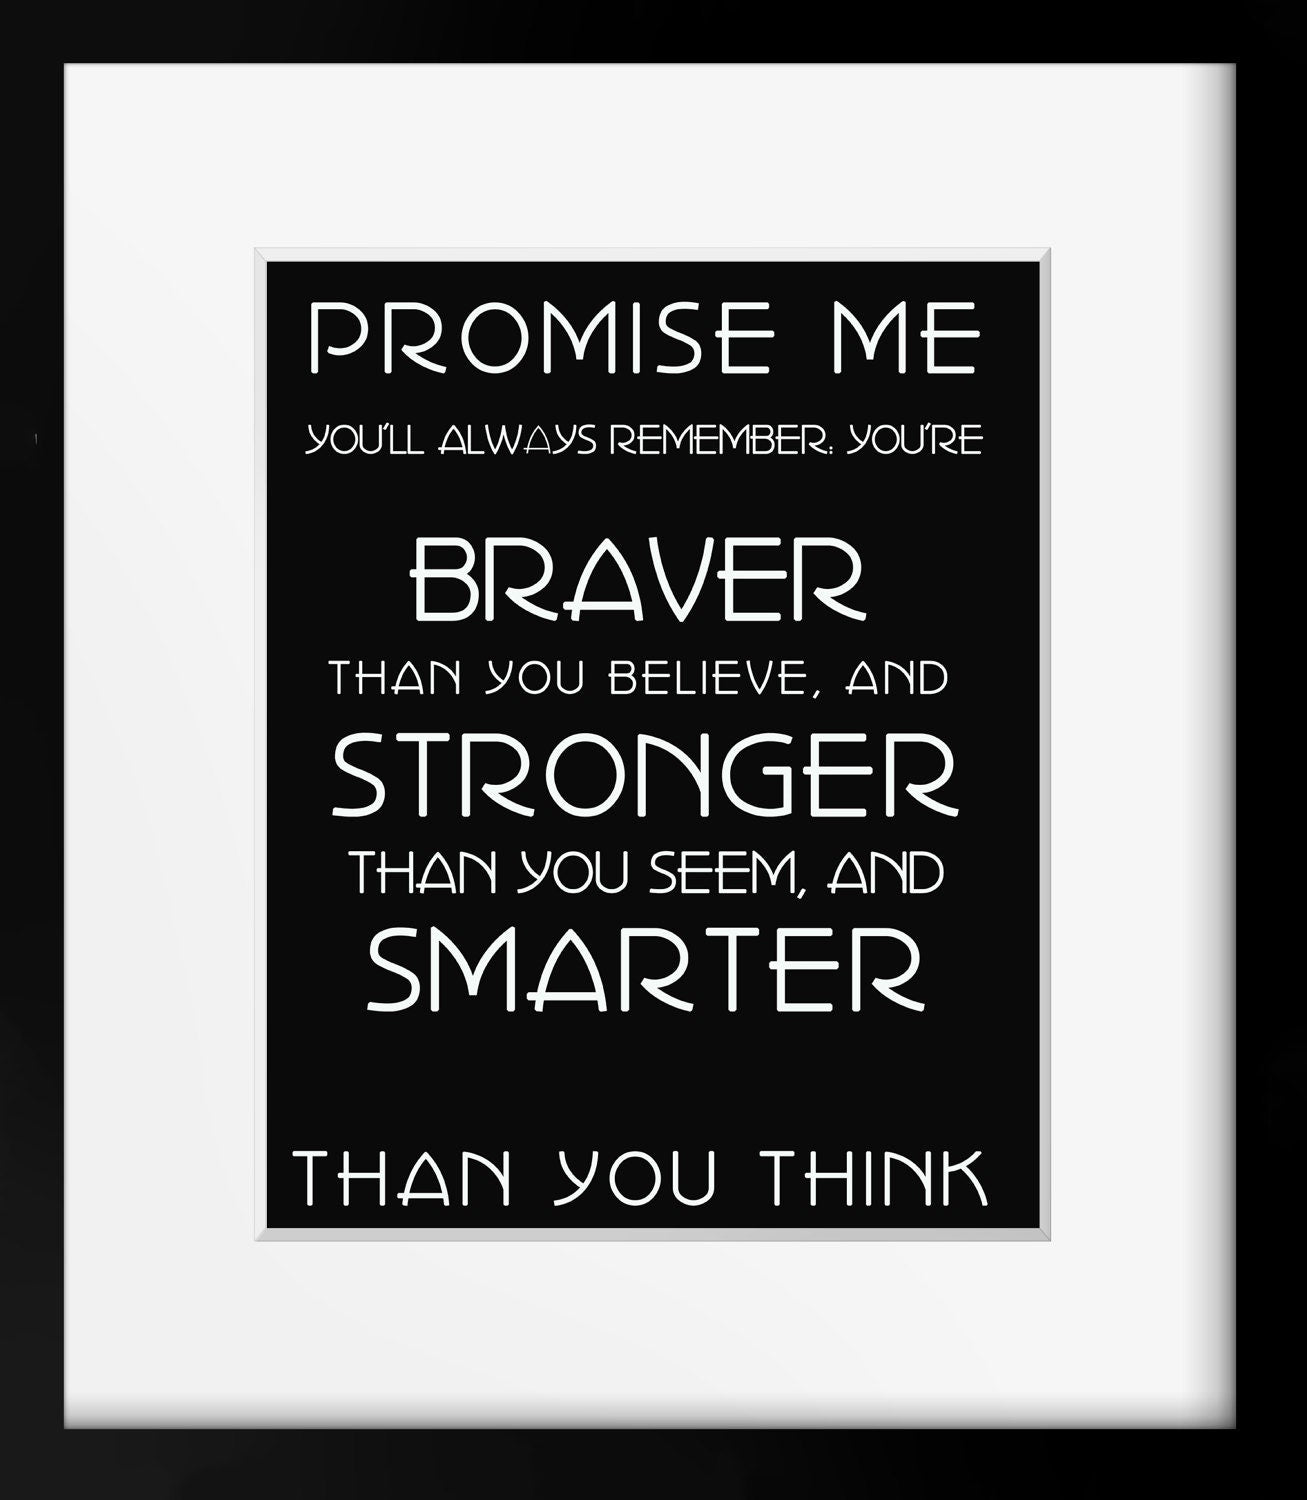 Promise Me Braver Stronger Smarter Winnie The Pooh Art Print, AA Milne Quote Unframed Inspirational Poster